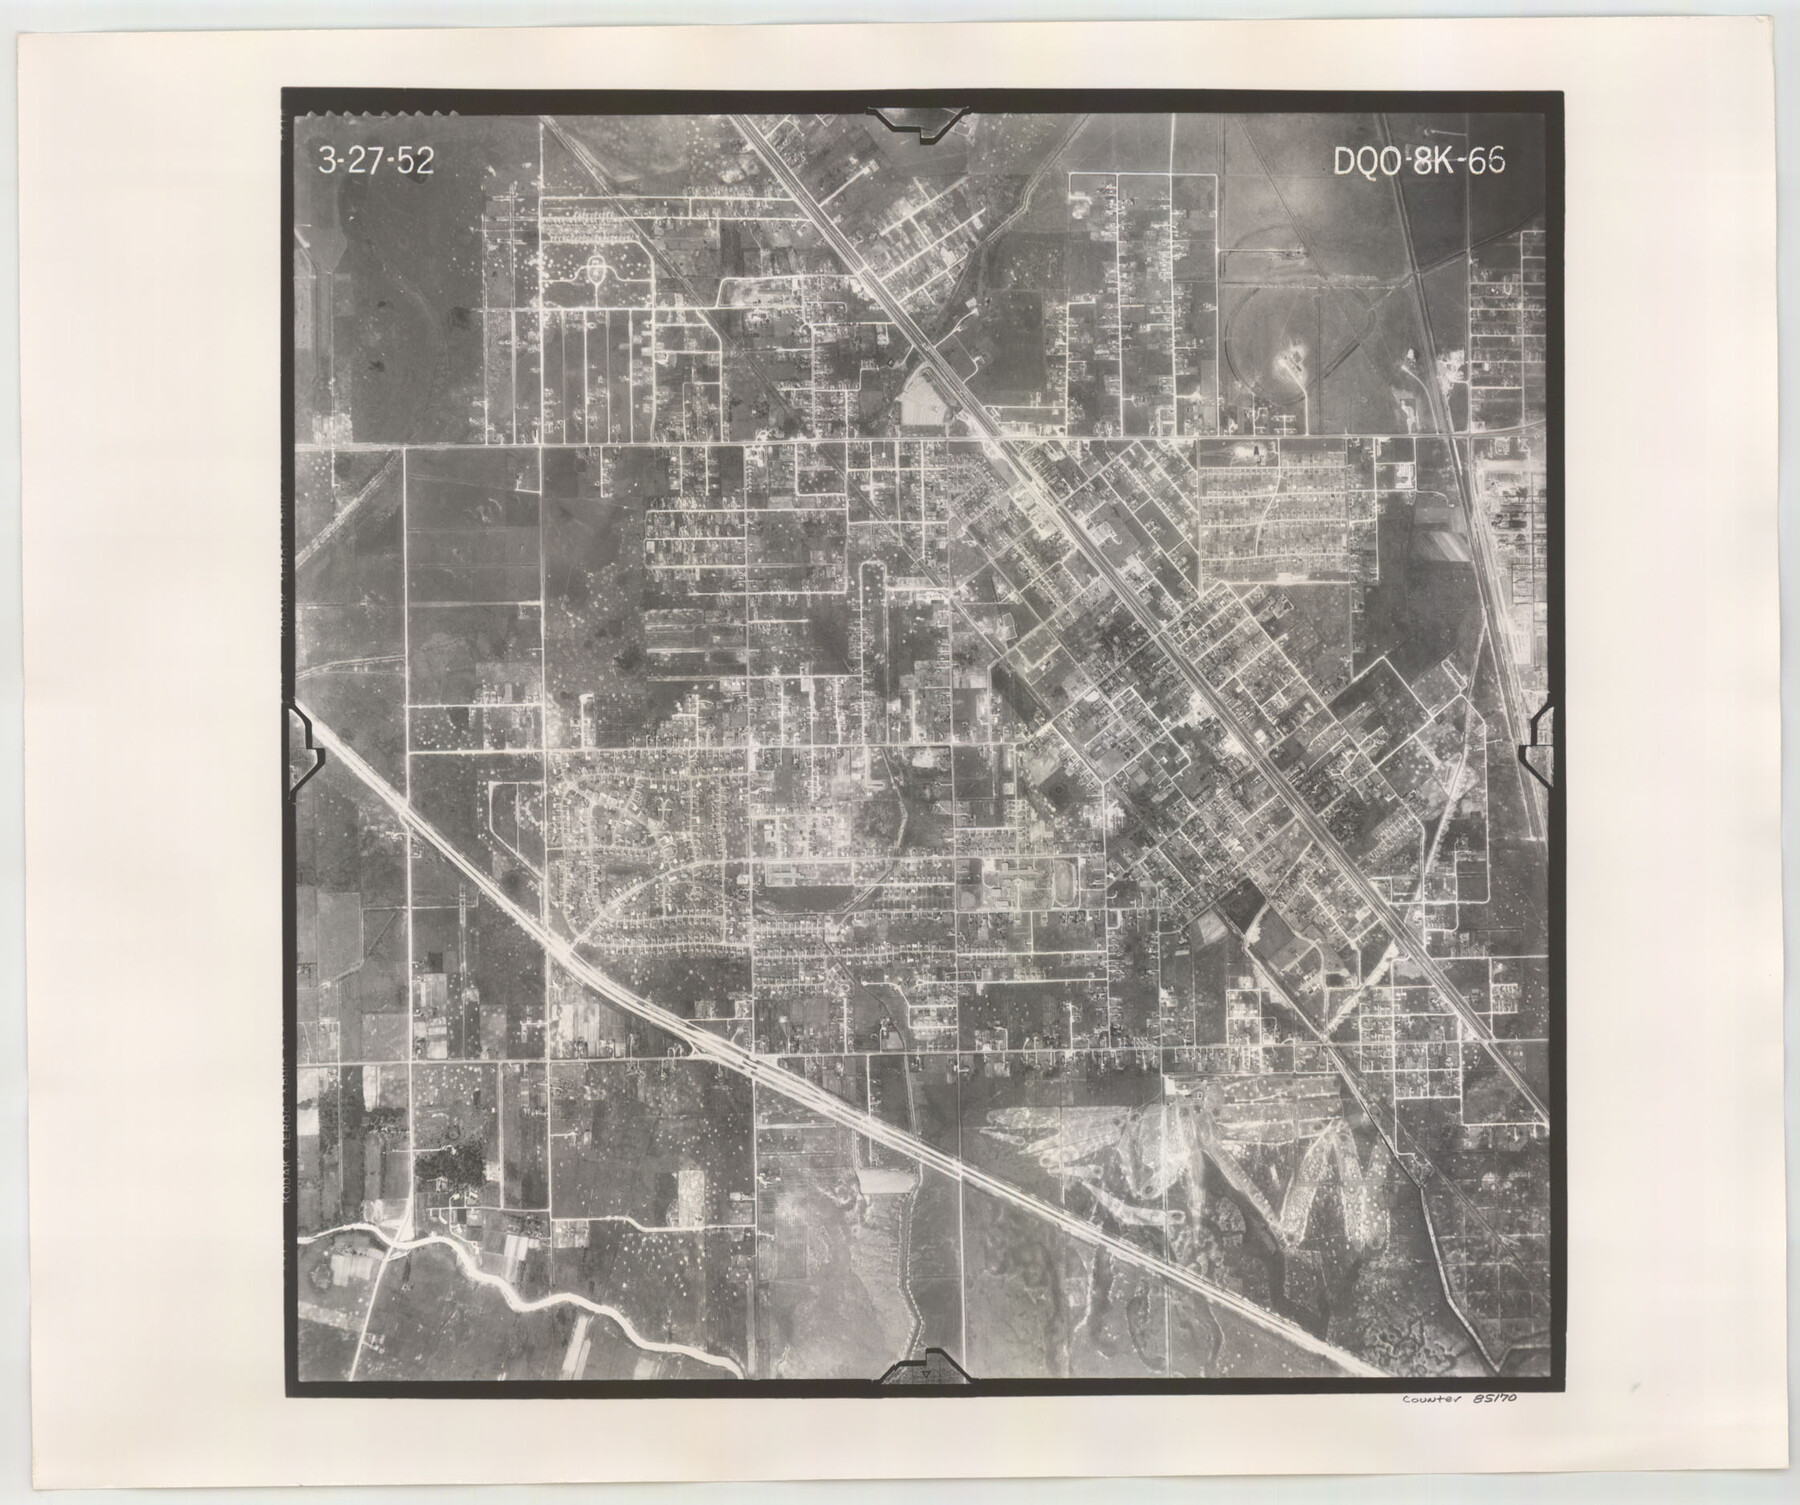 85170, Flight Mission No. DQO-8K, Frame 66, Galveston County, General Map Collection